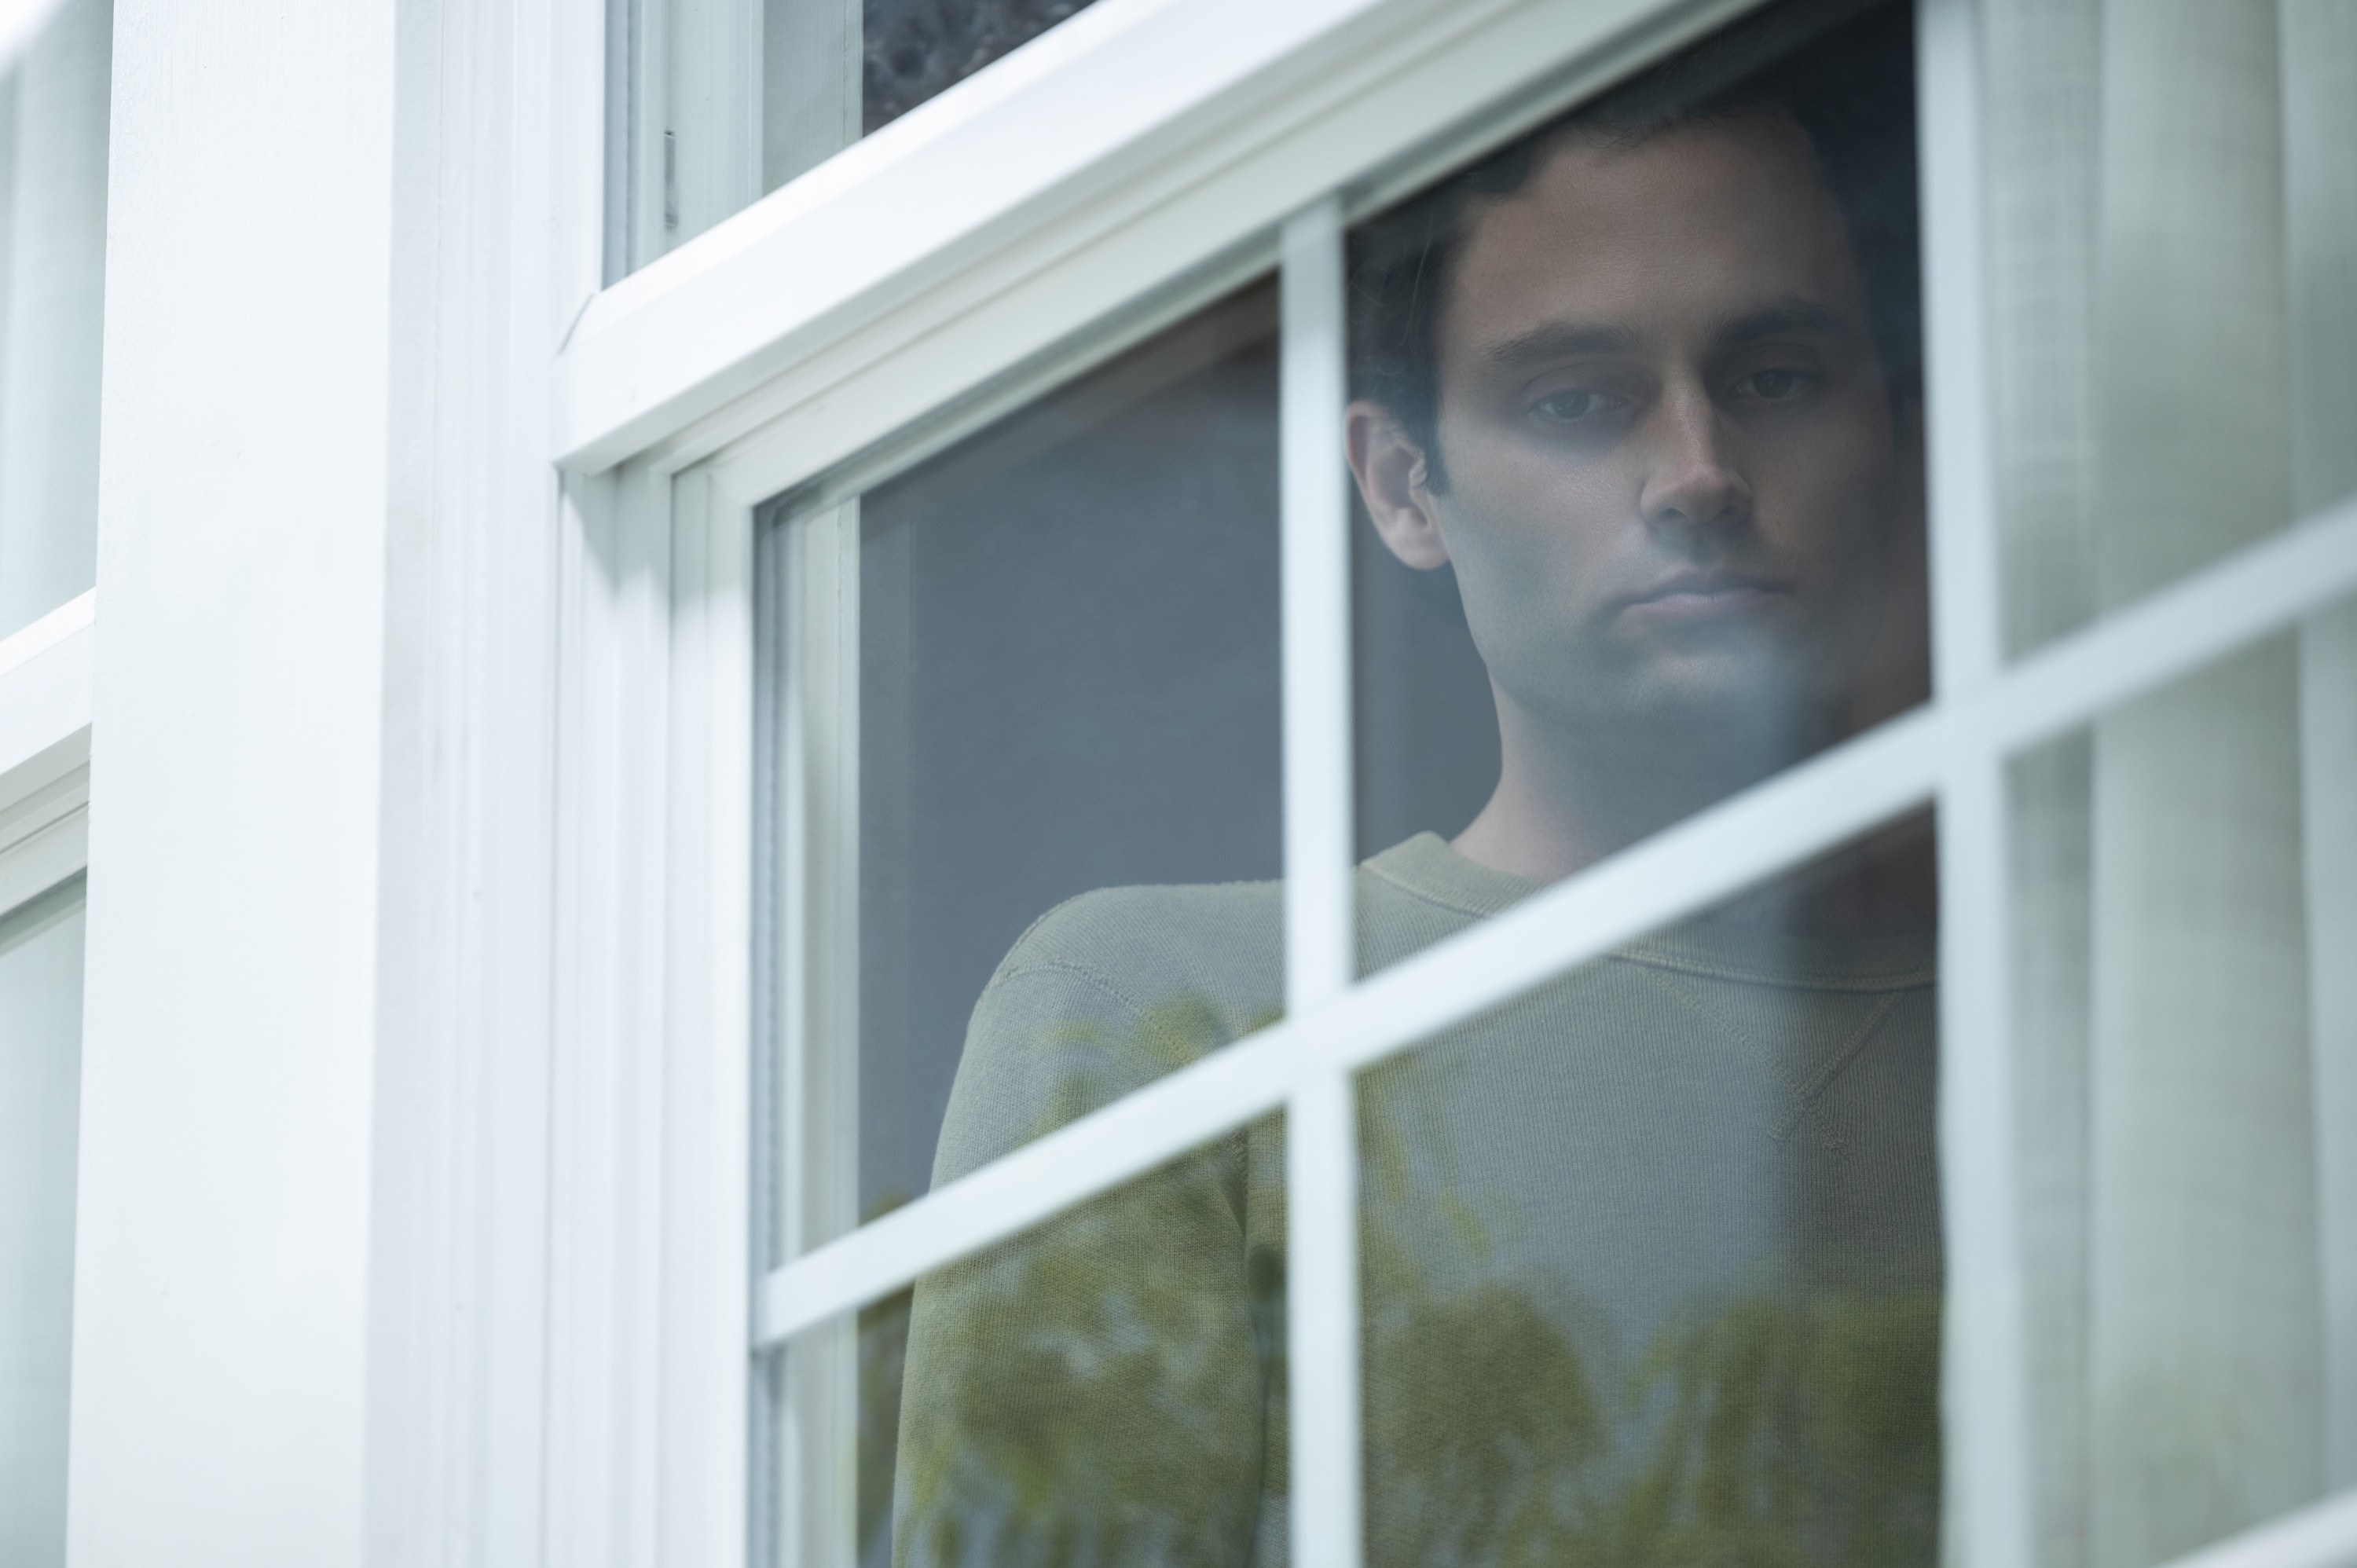 Penn Badgley looking down from a second floor window